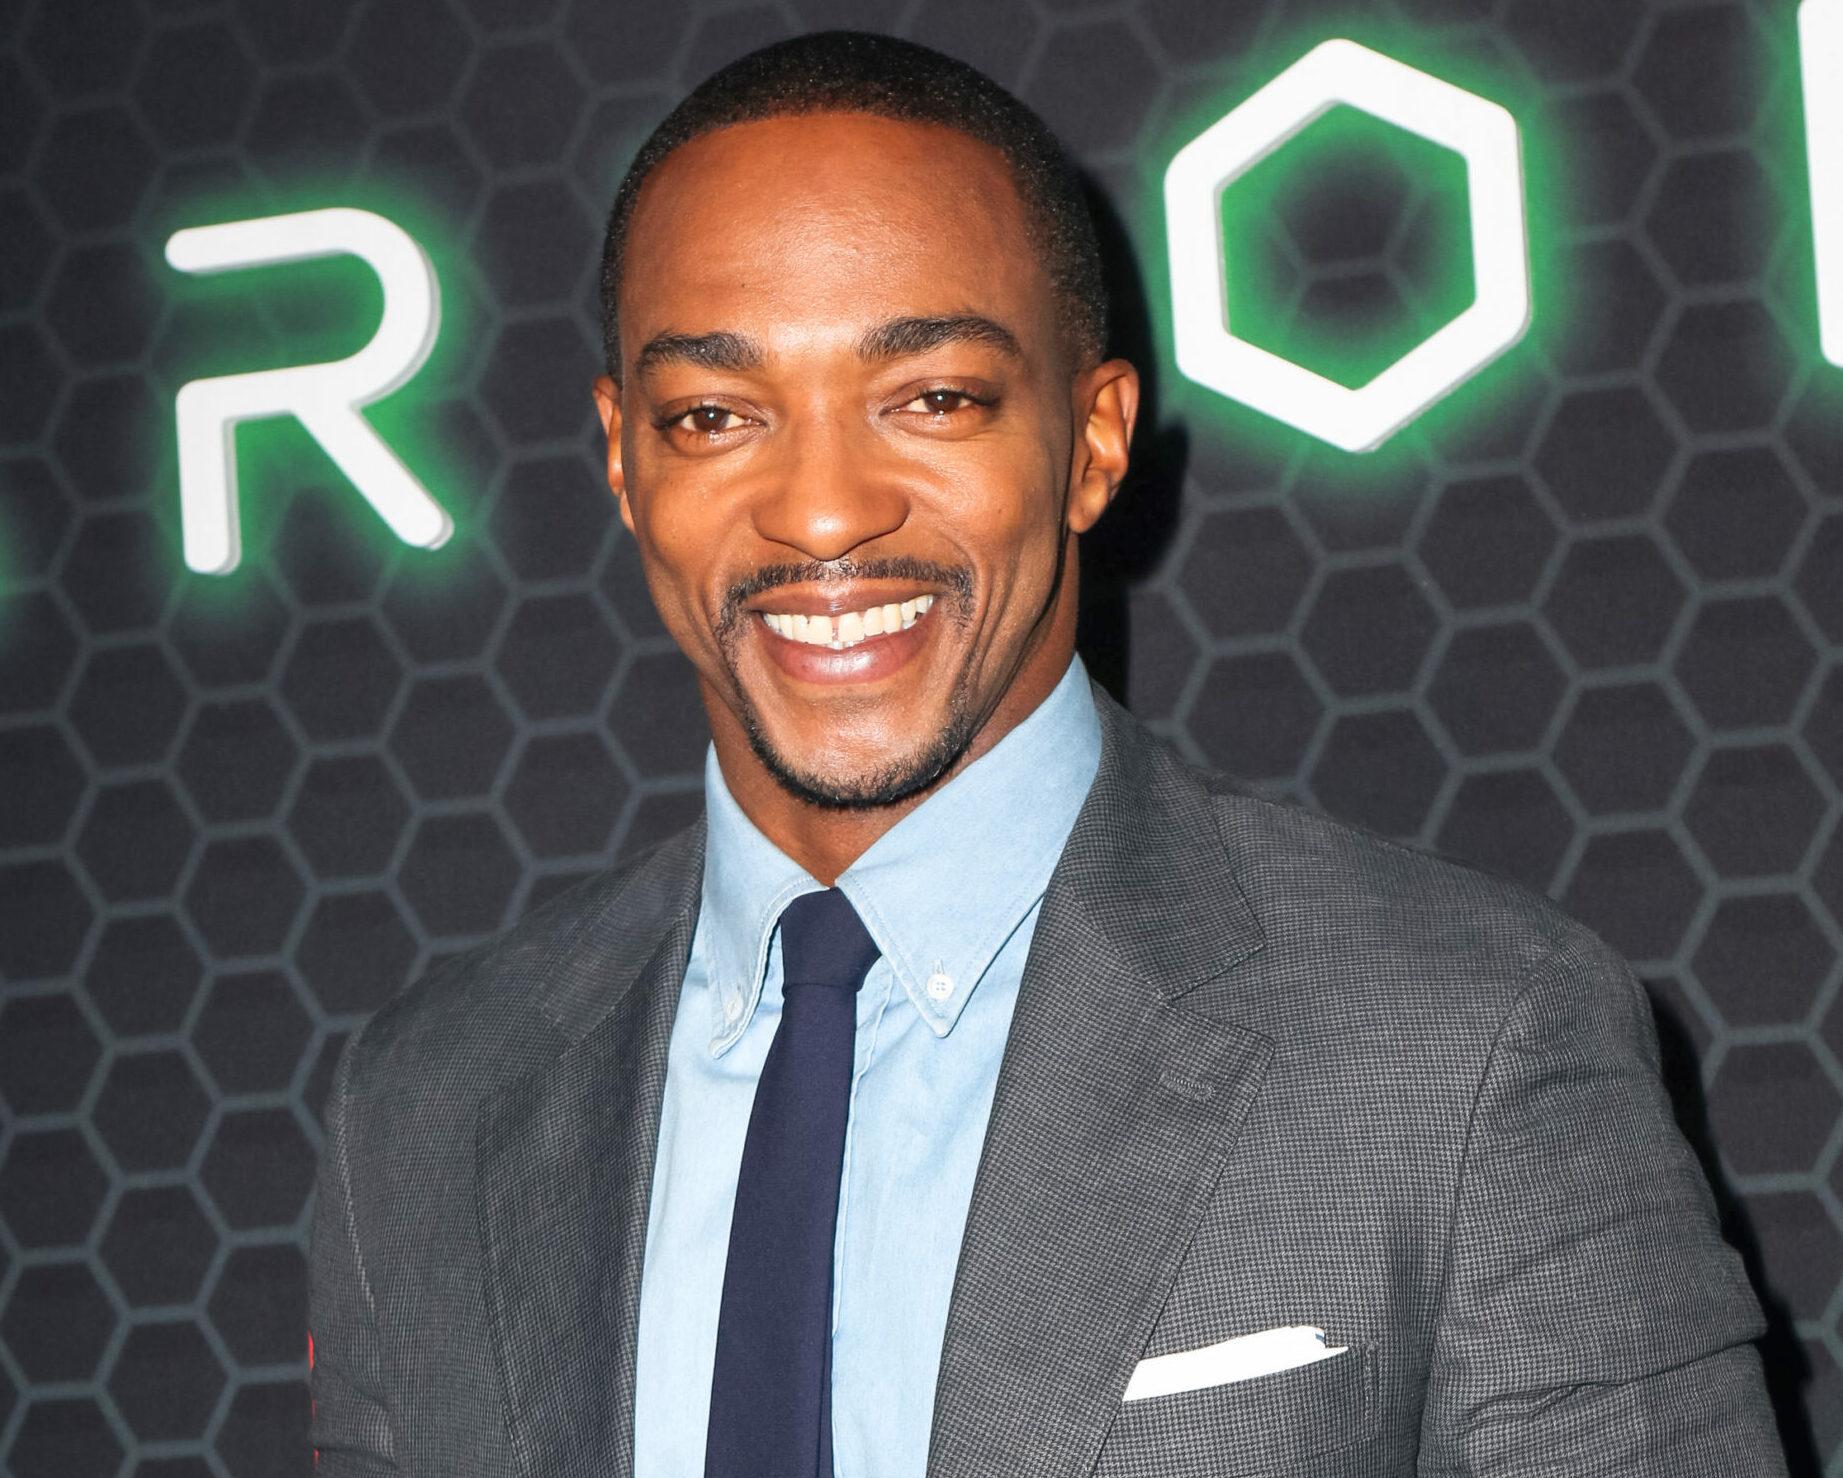 Altered Carbon Season 2 Fan Event and Reception, Anthony Mackie